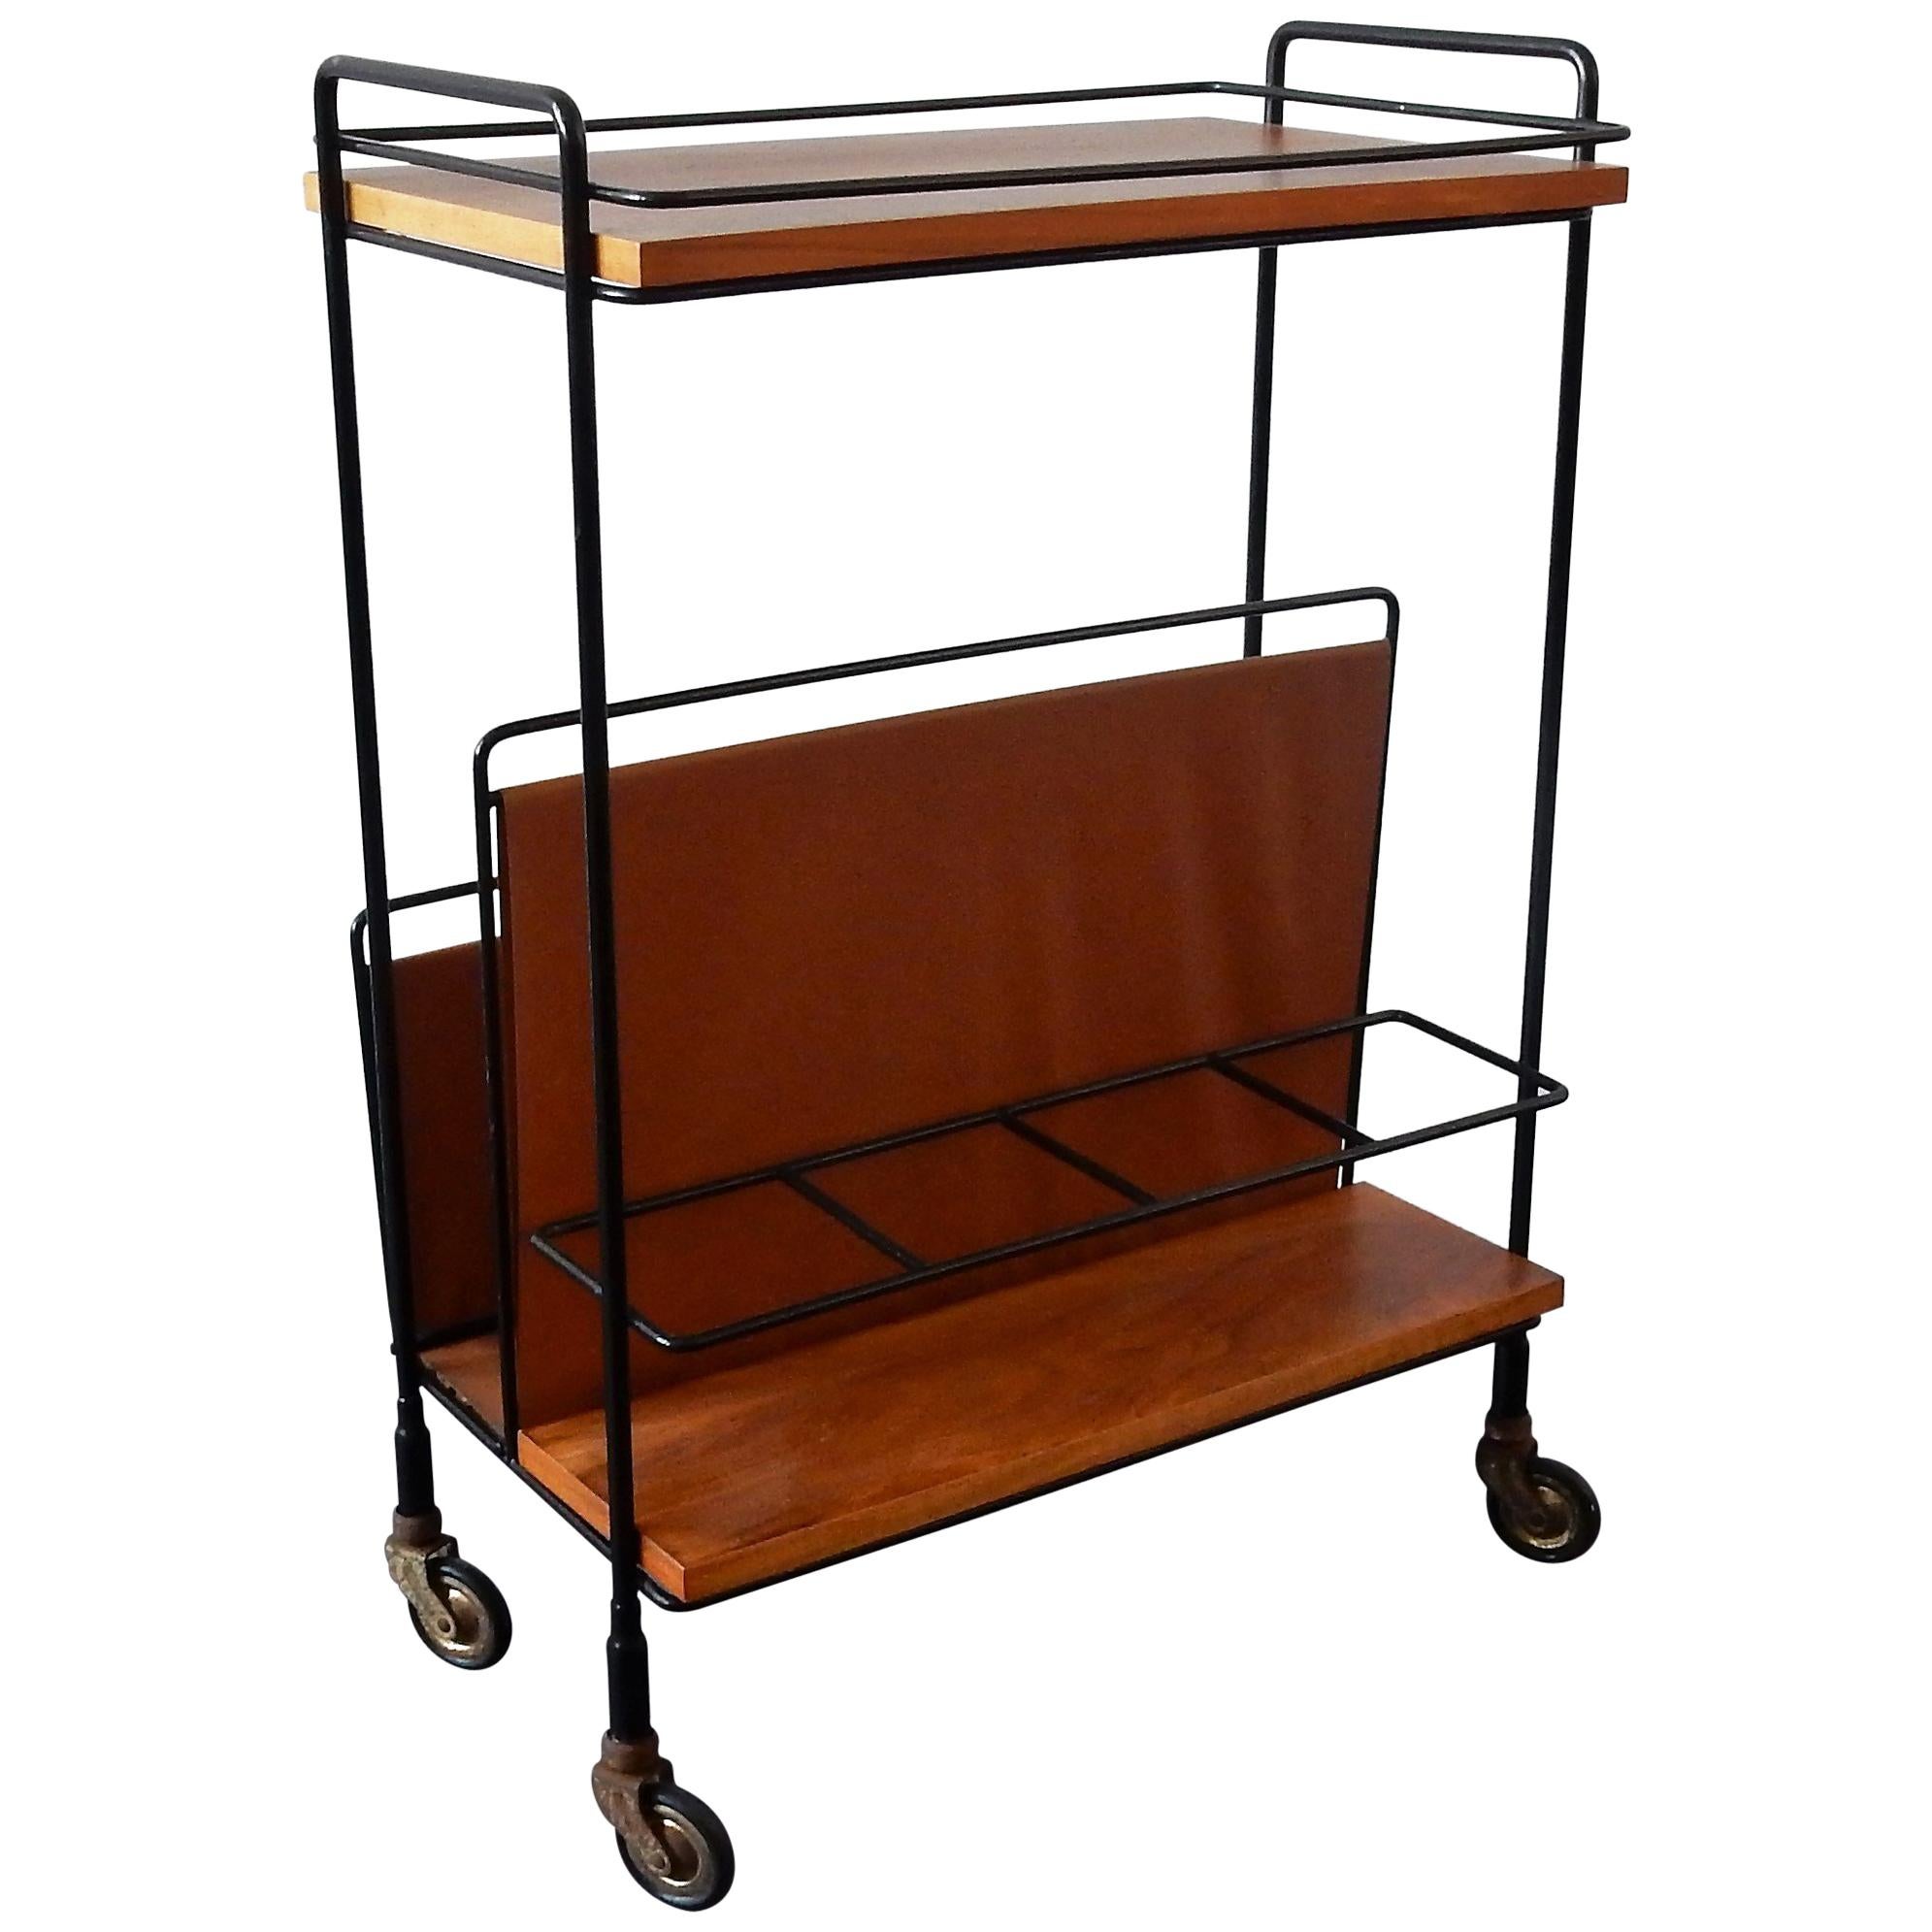 Vintage Bar Cart or Serving Trolley with Magazine Rack, 1960s